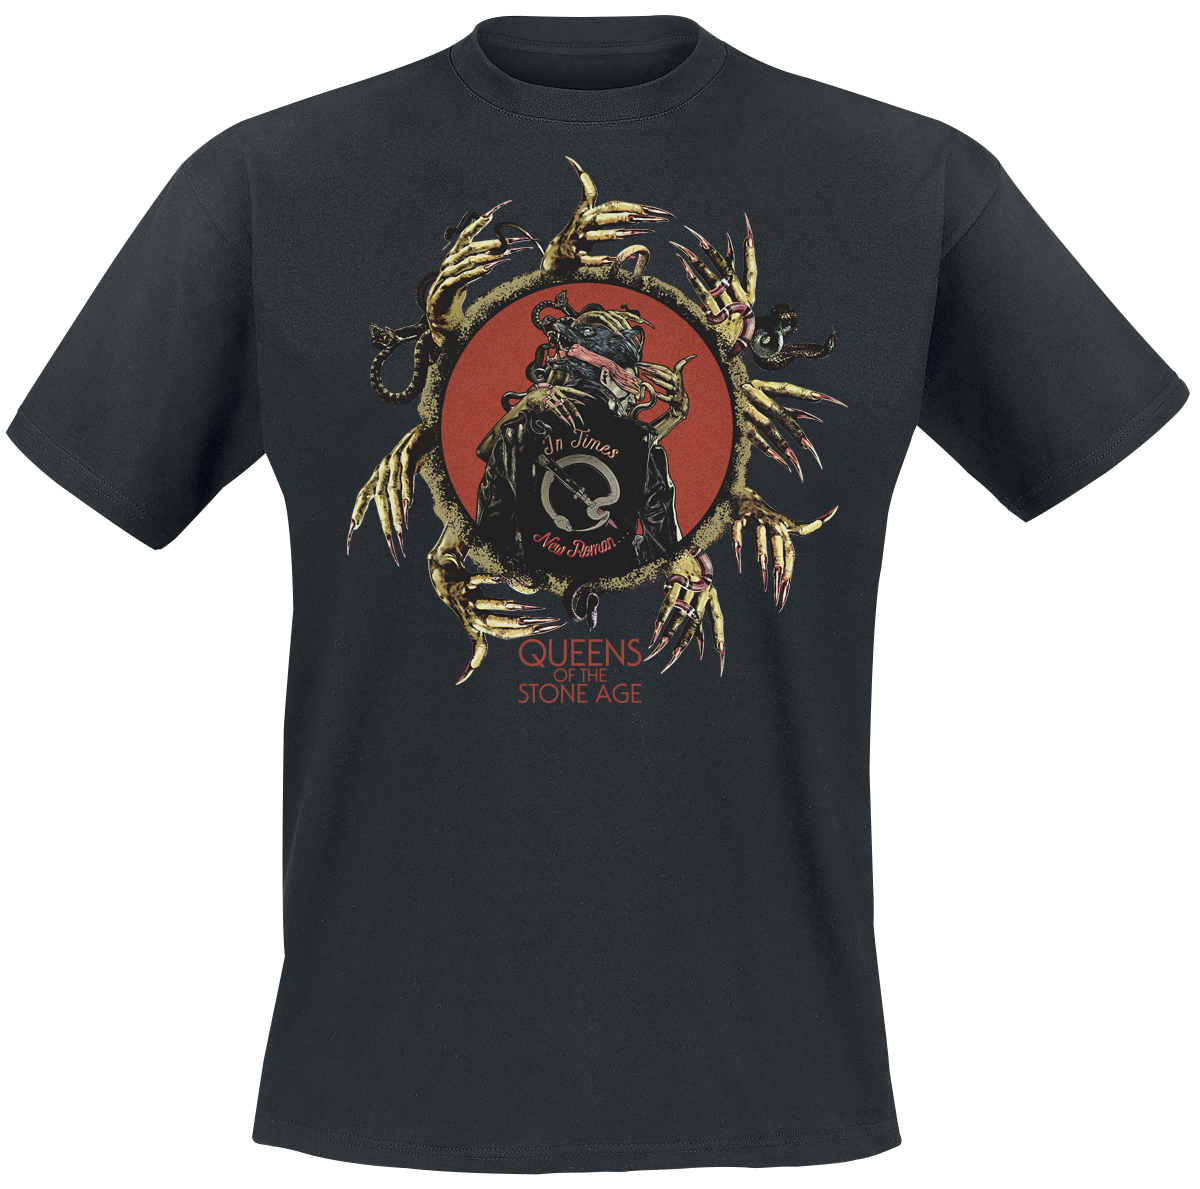 Queens Of The Stone Age - In Times New Roman - Circle Hands - T-Shirt - schwarz